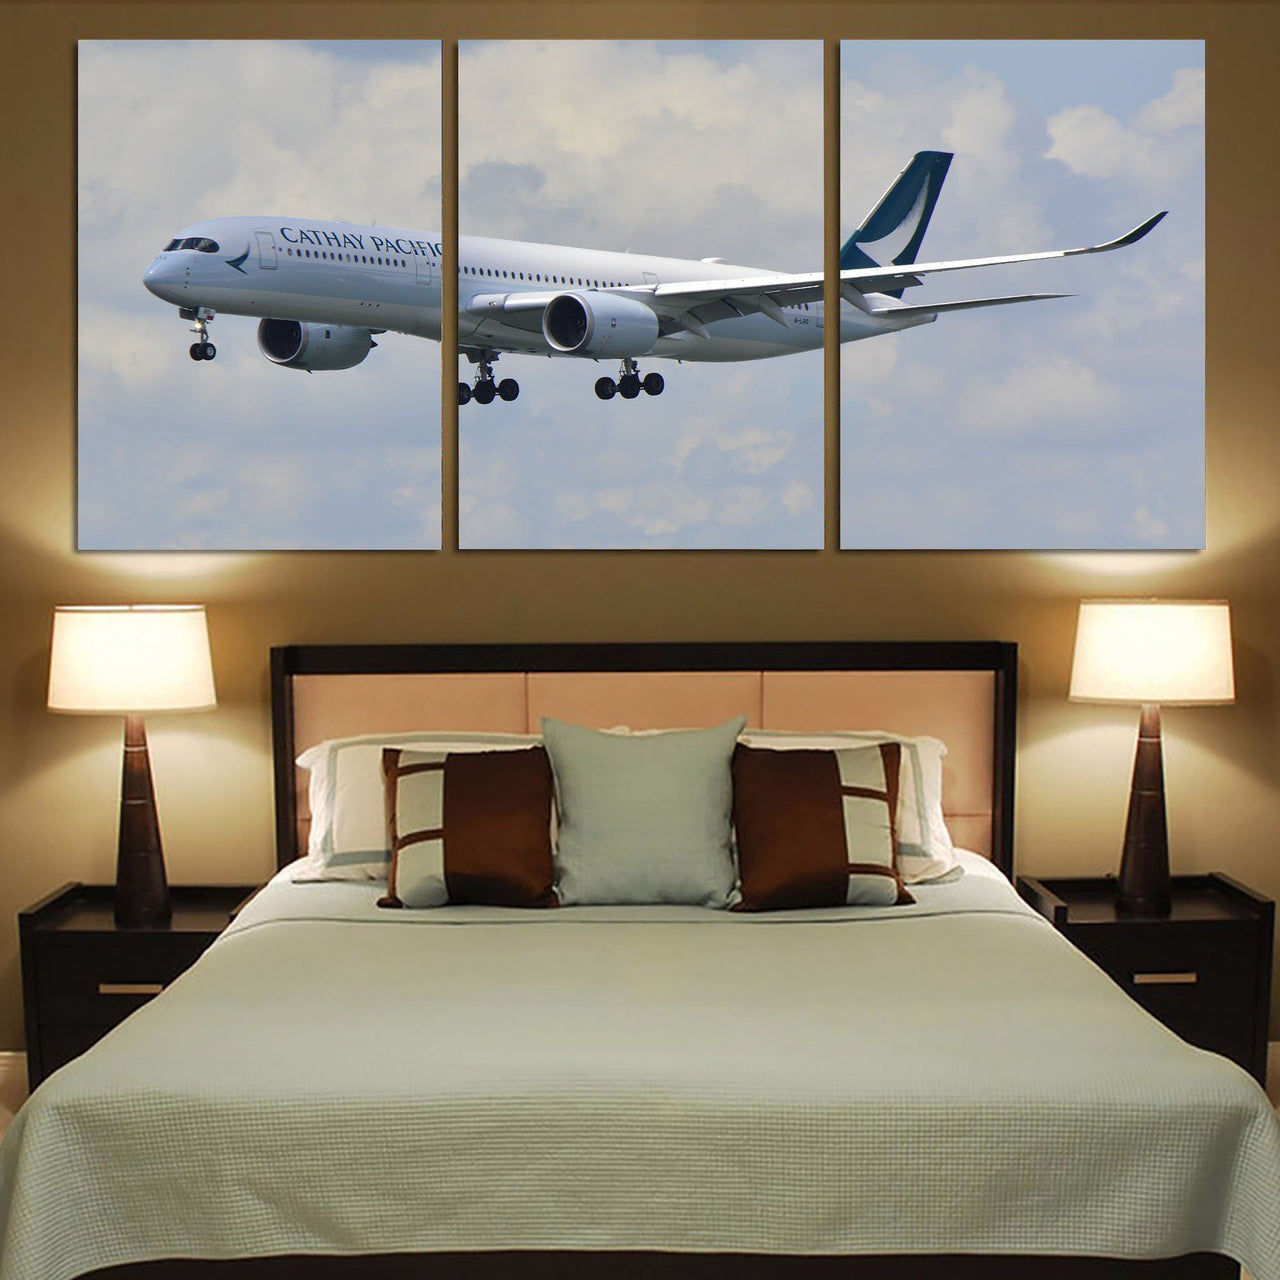 Cathay Pacific Airbus A350 Printed Canvas Posters (3 Pieces) Aviation Shop 